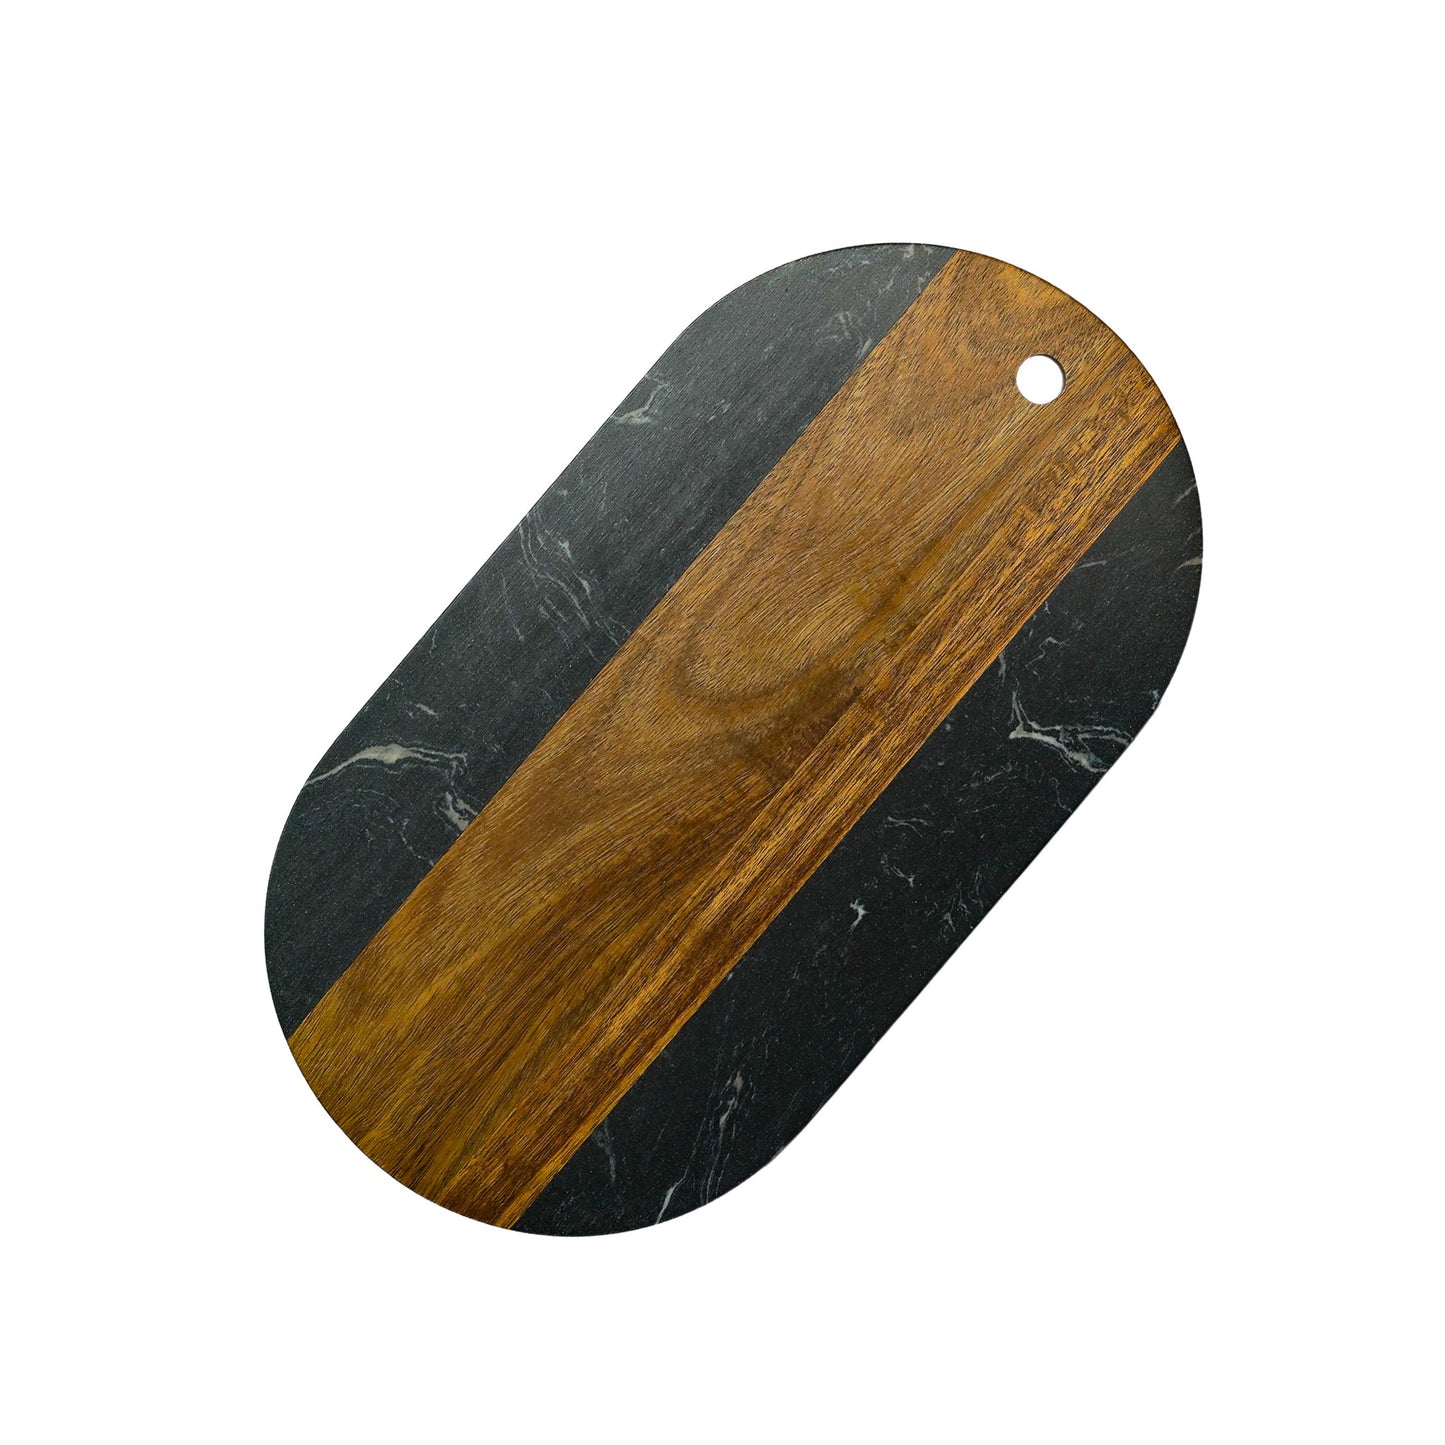 Black Marble and Acacia Wood Oval Board by Creative Gifts